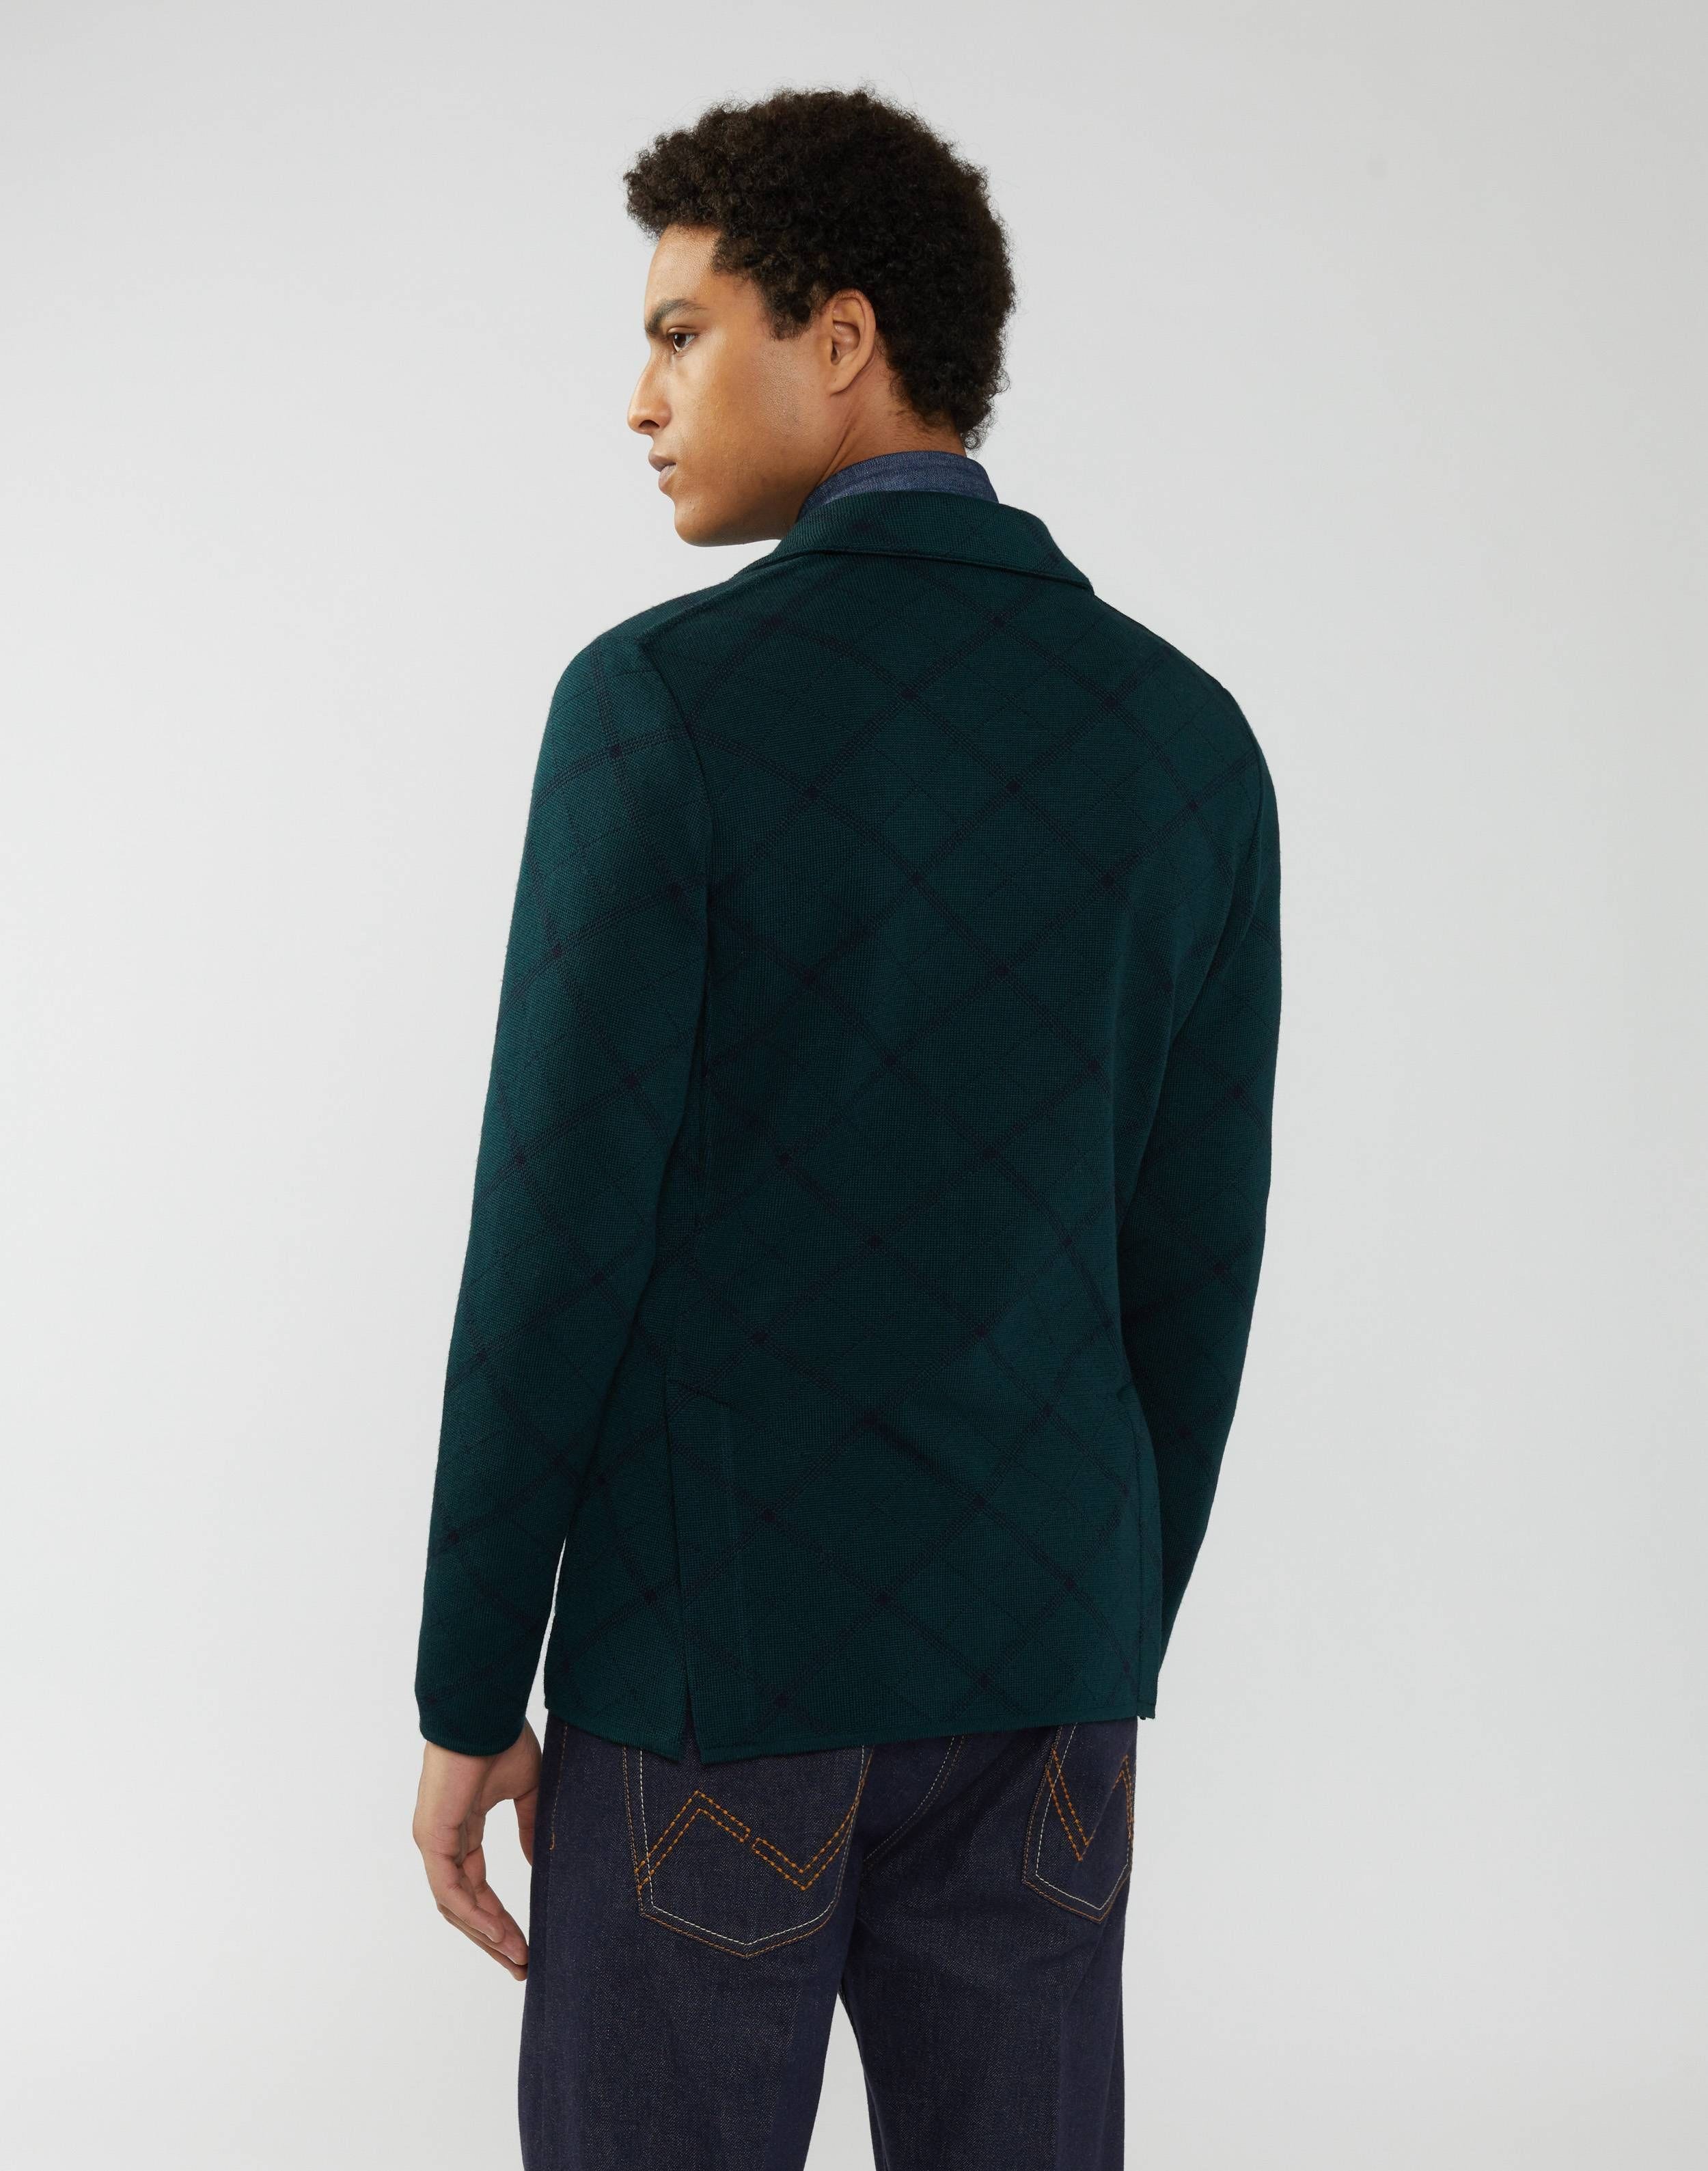 Knitted jacket in a green-and-blue diamond pattern